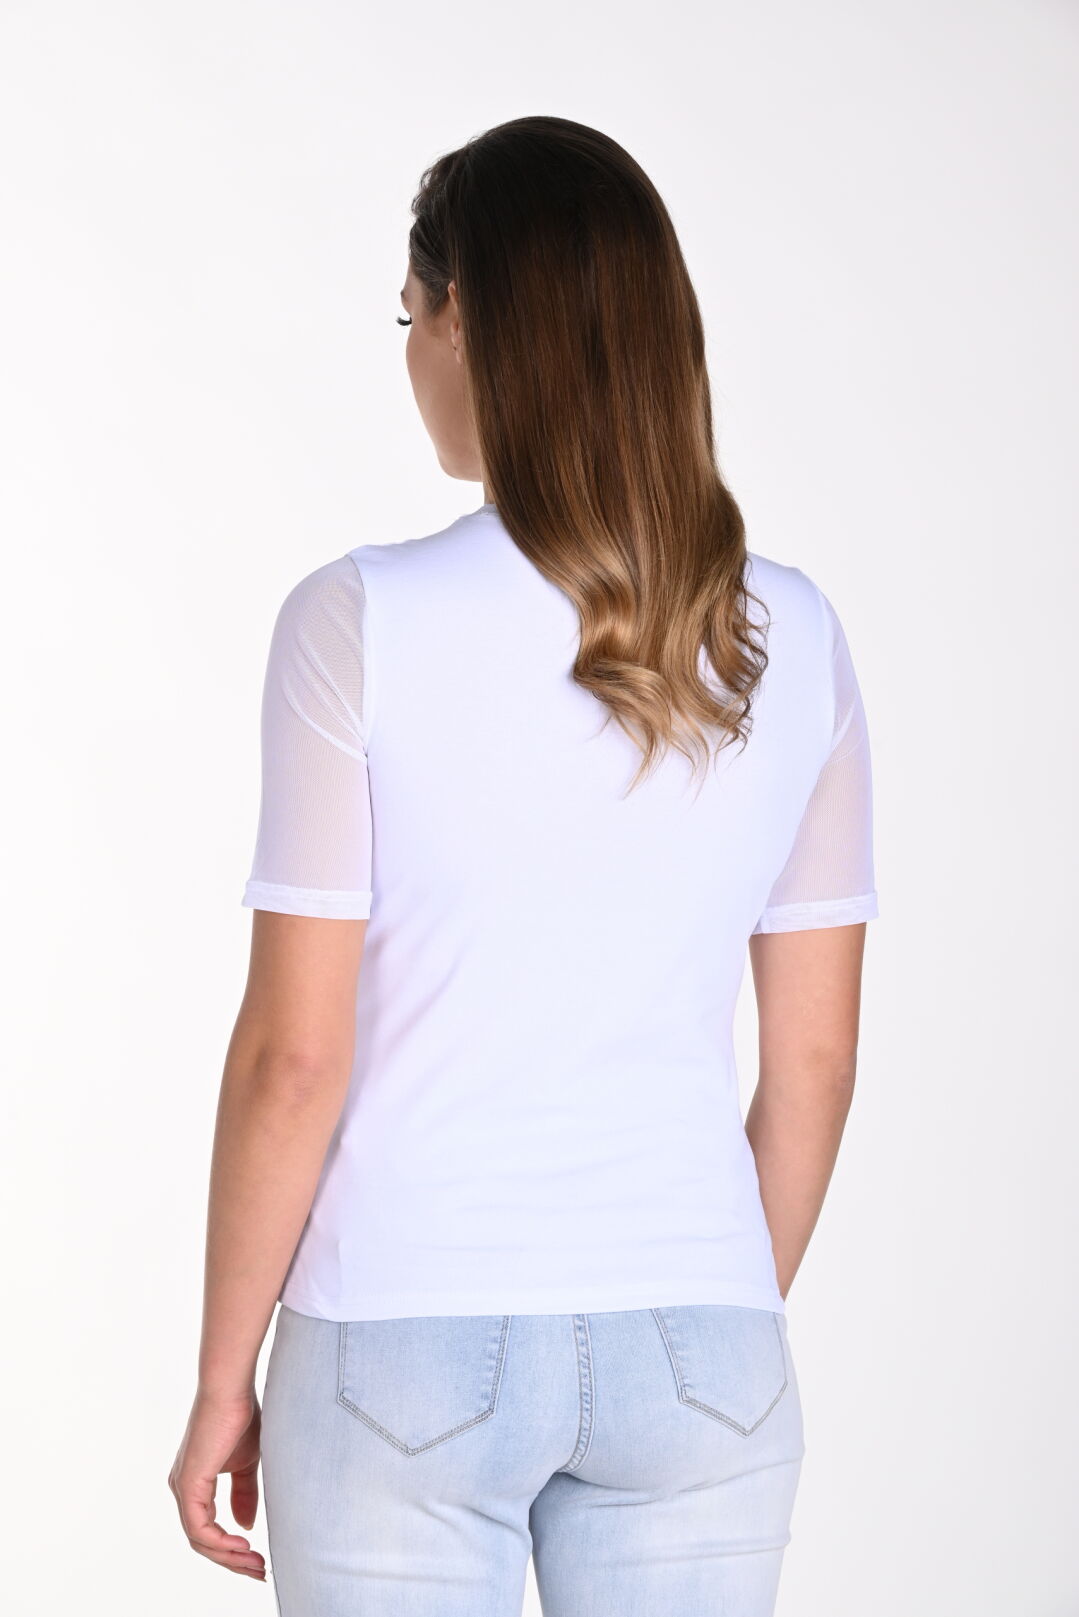 Frank Lyman Stacey Top White